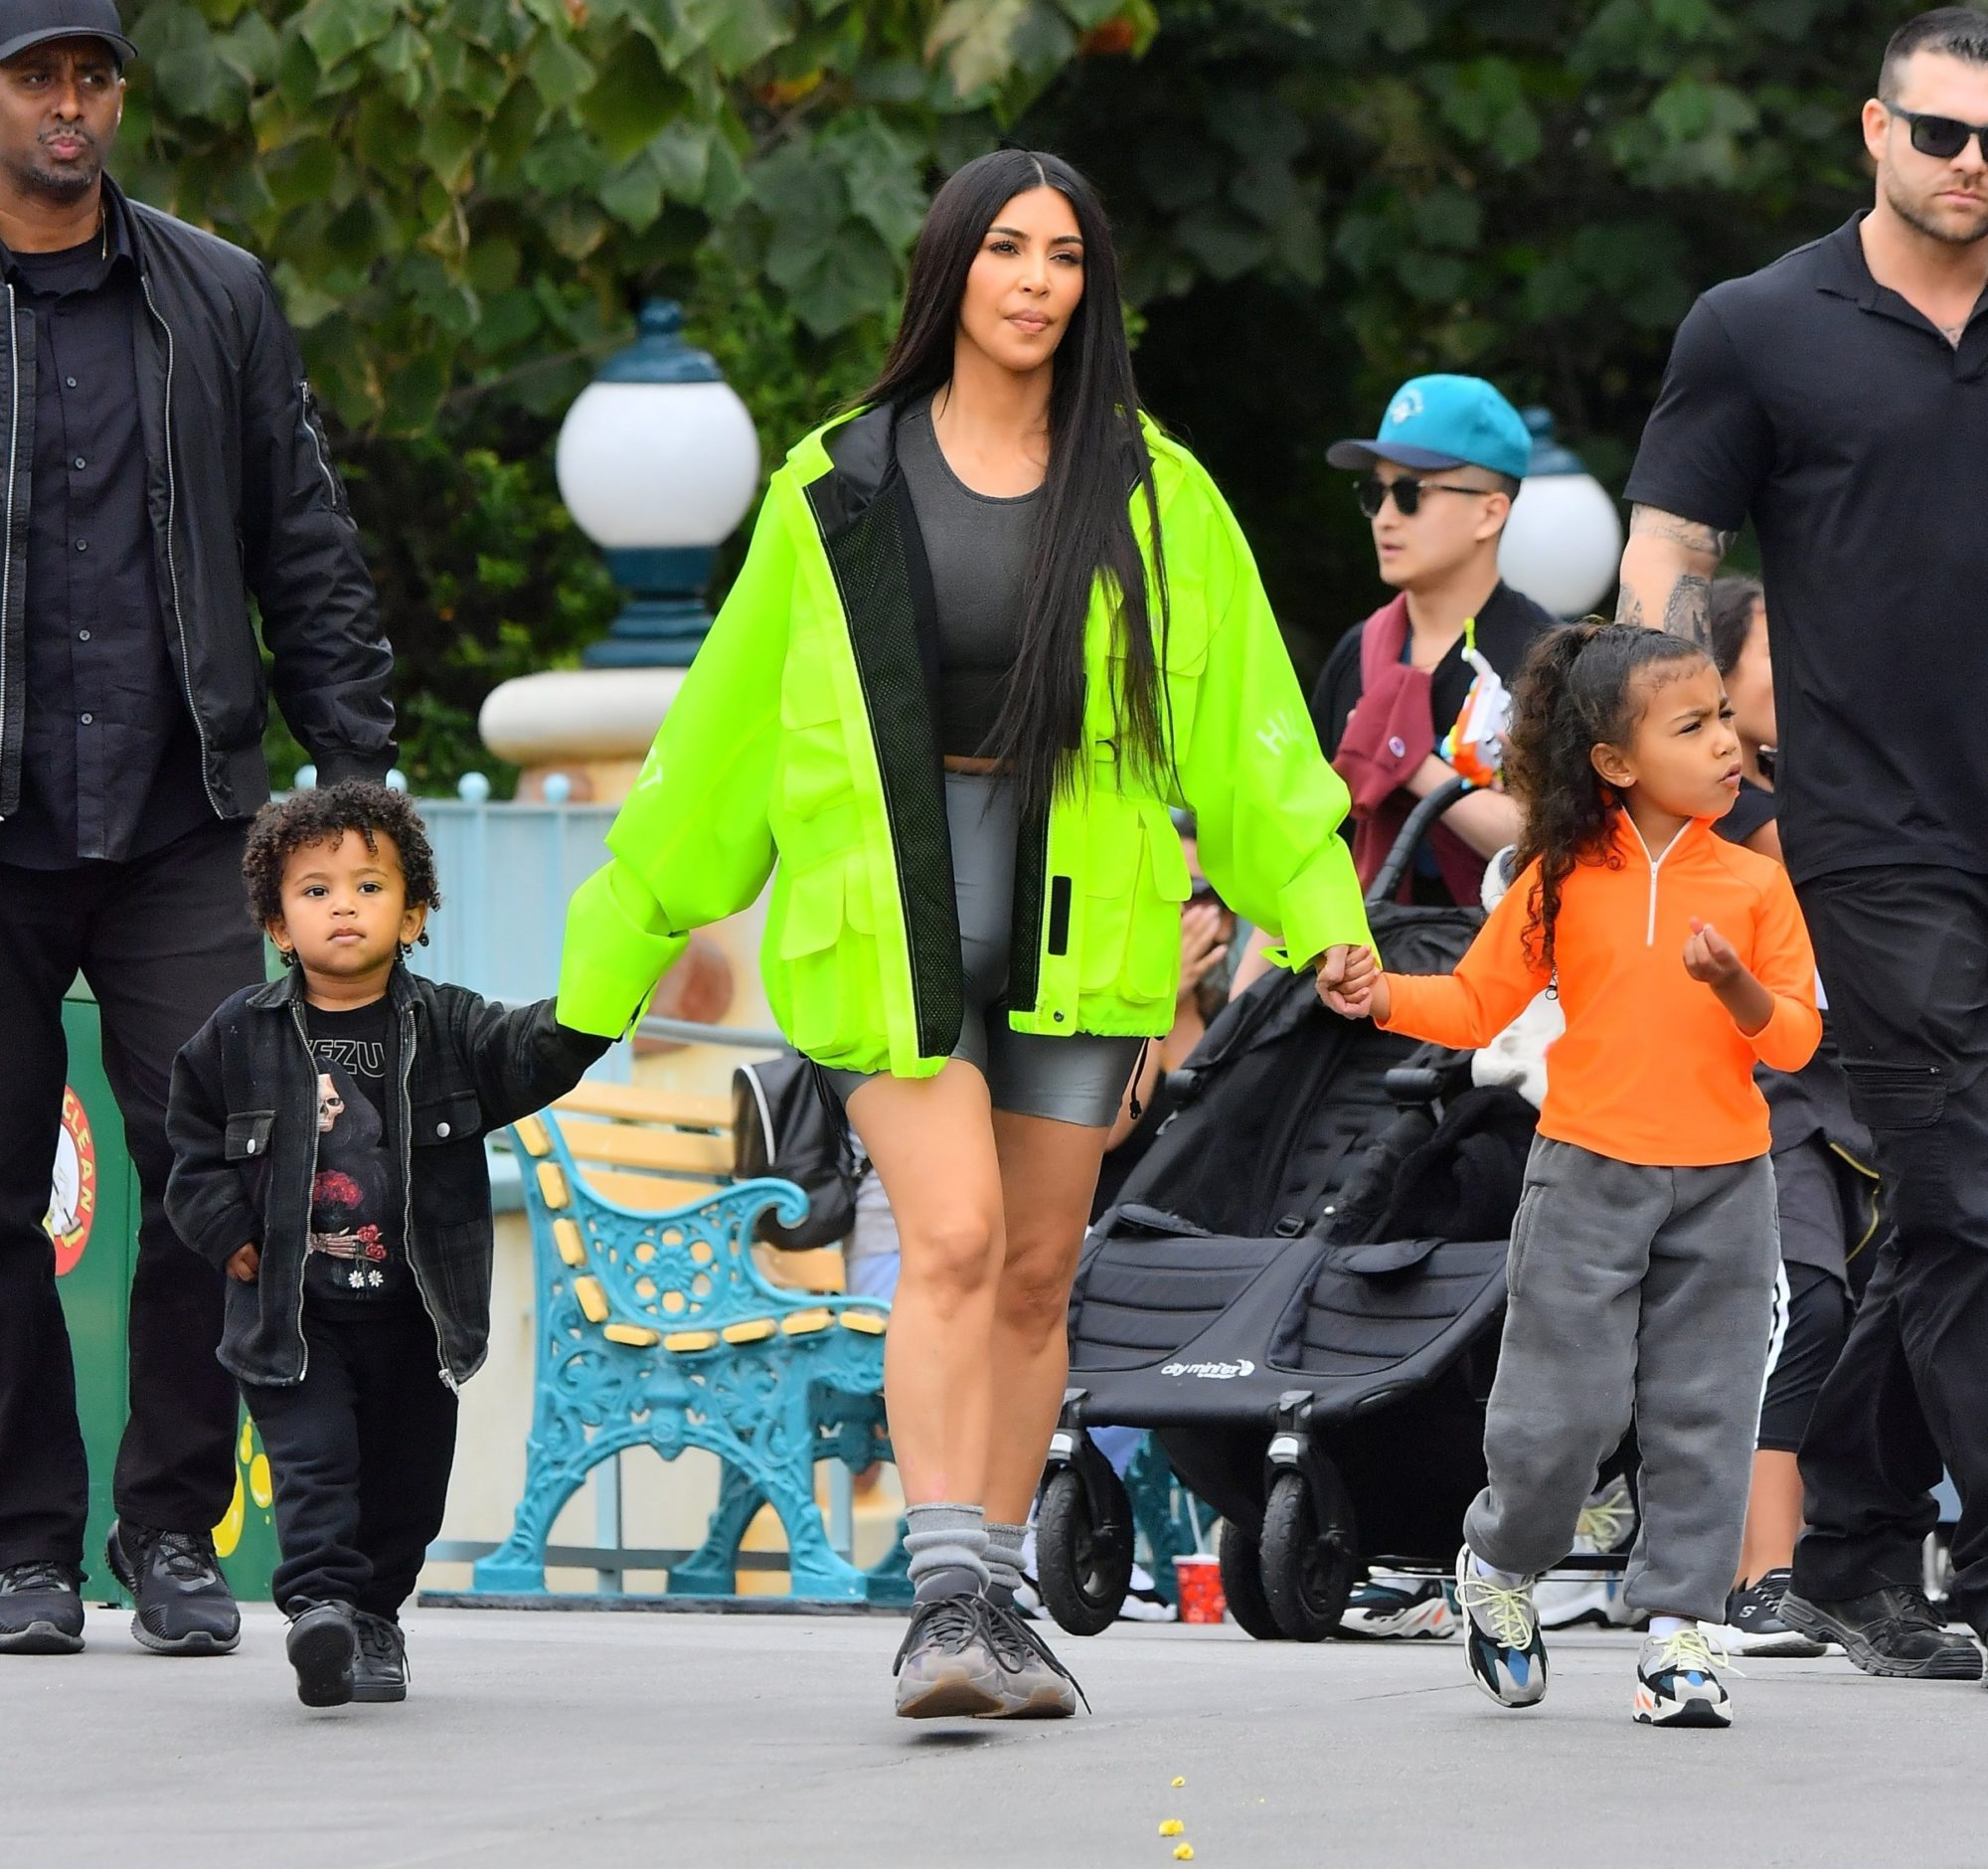 likhoa kim kardashian and her younger sister kourtney stood out in front of the camera when they took their kids to disneyland to enjoy the year end weather 65698ae5547e6 Kim Kardashian And Her Younger Sister Kourtney Stood Out In Front Of The Camera When They Took Their Kids To Disneyland To Enjoy The Year-end Weather.